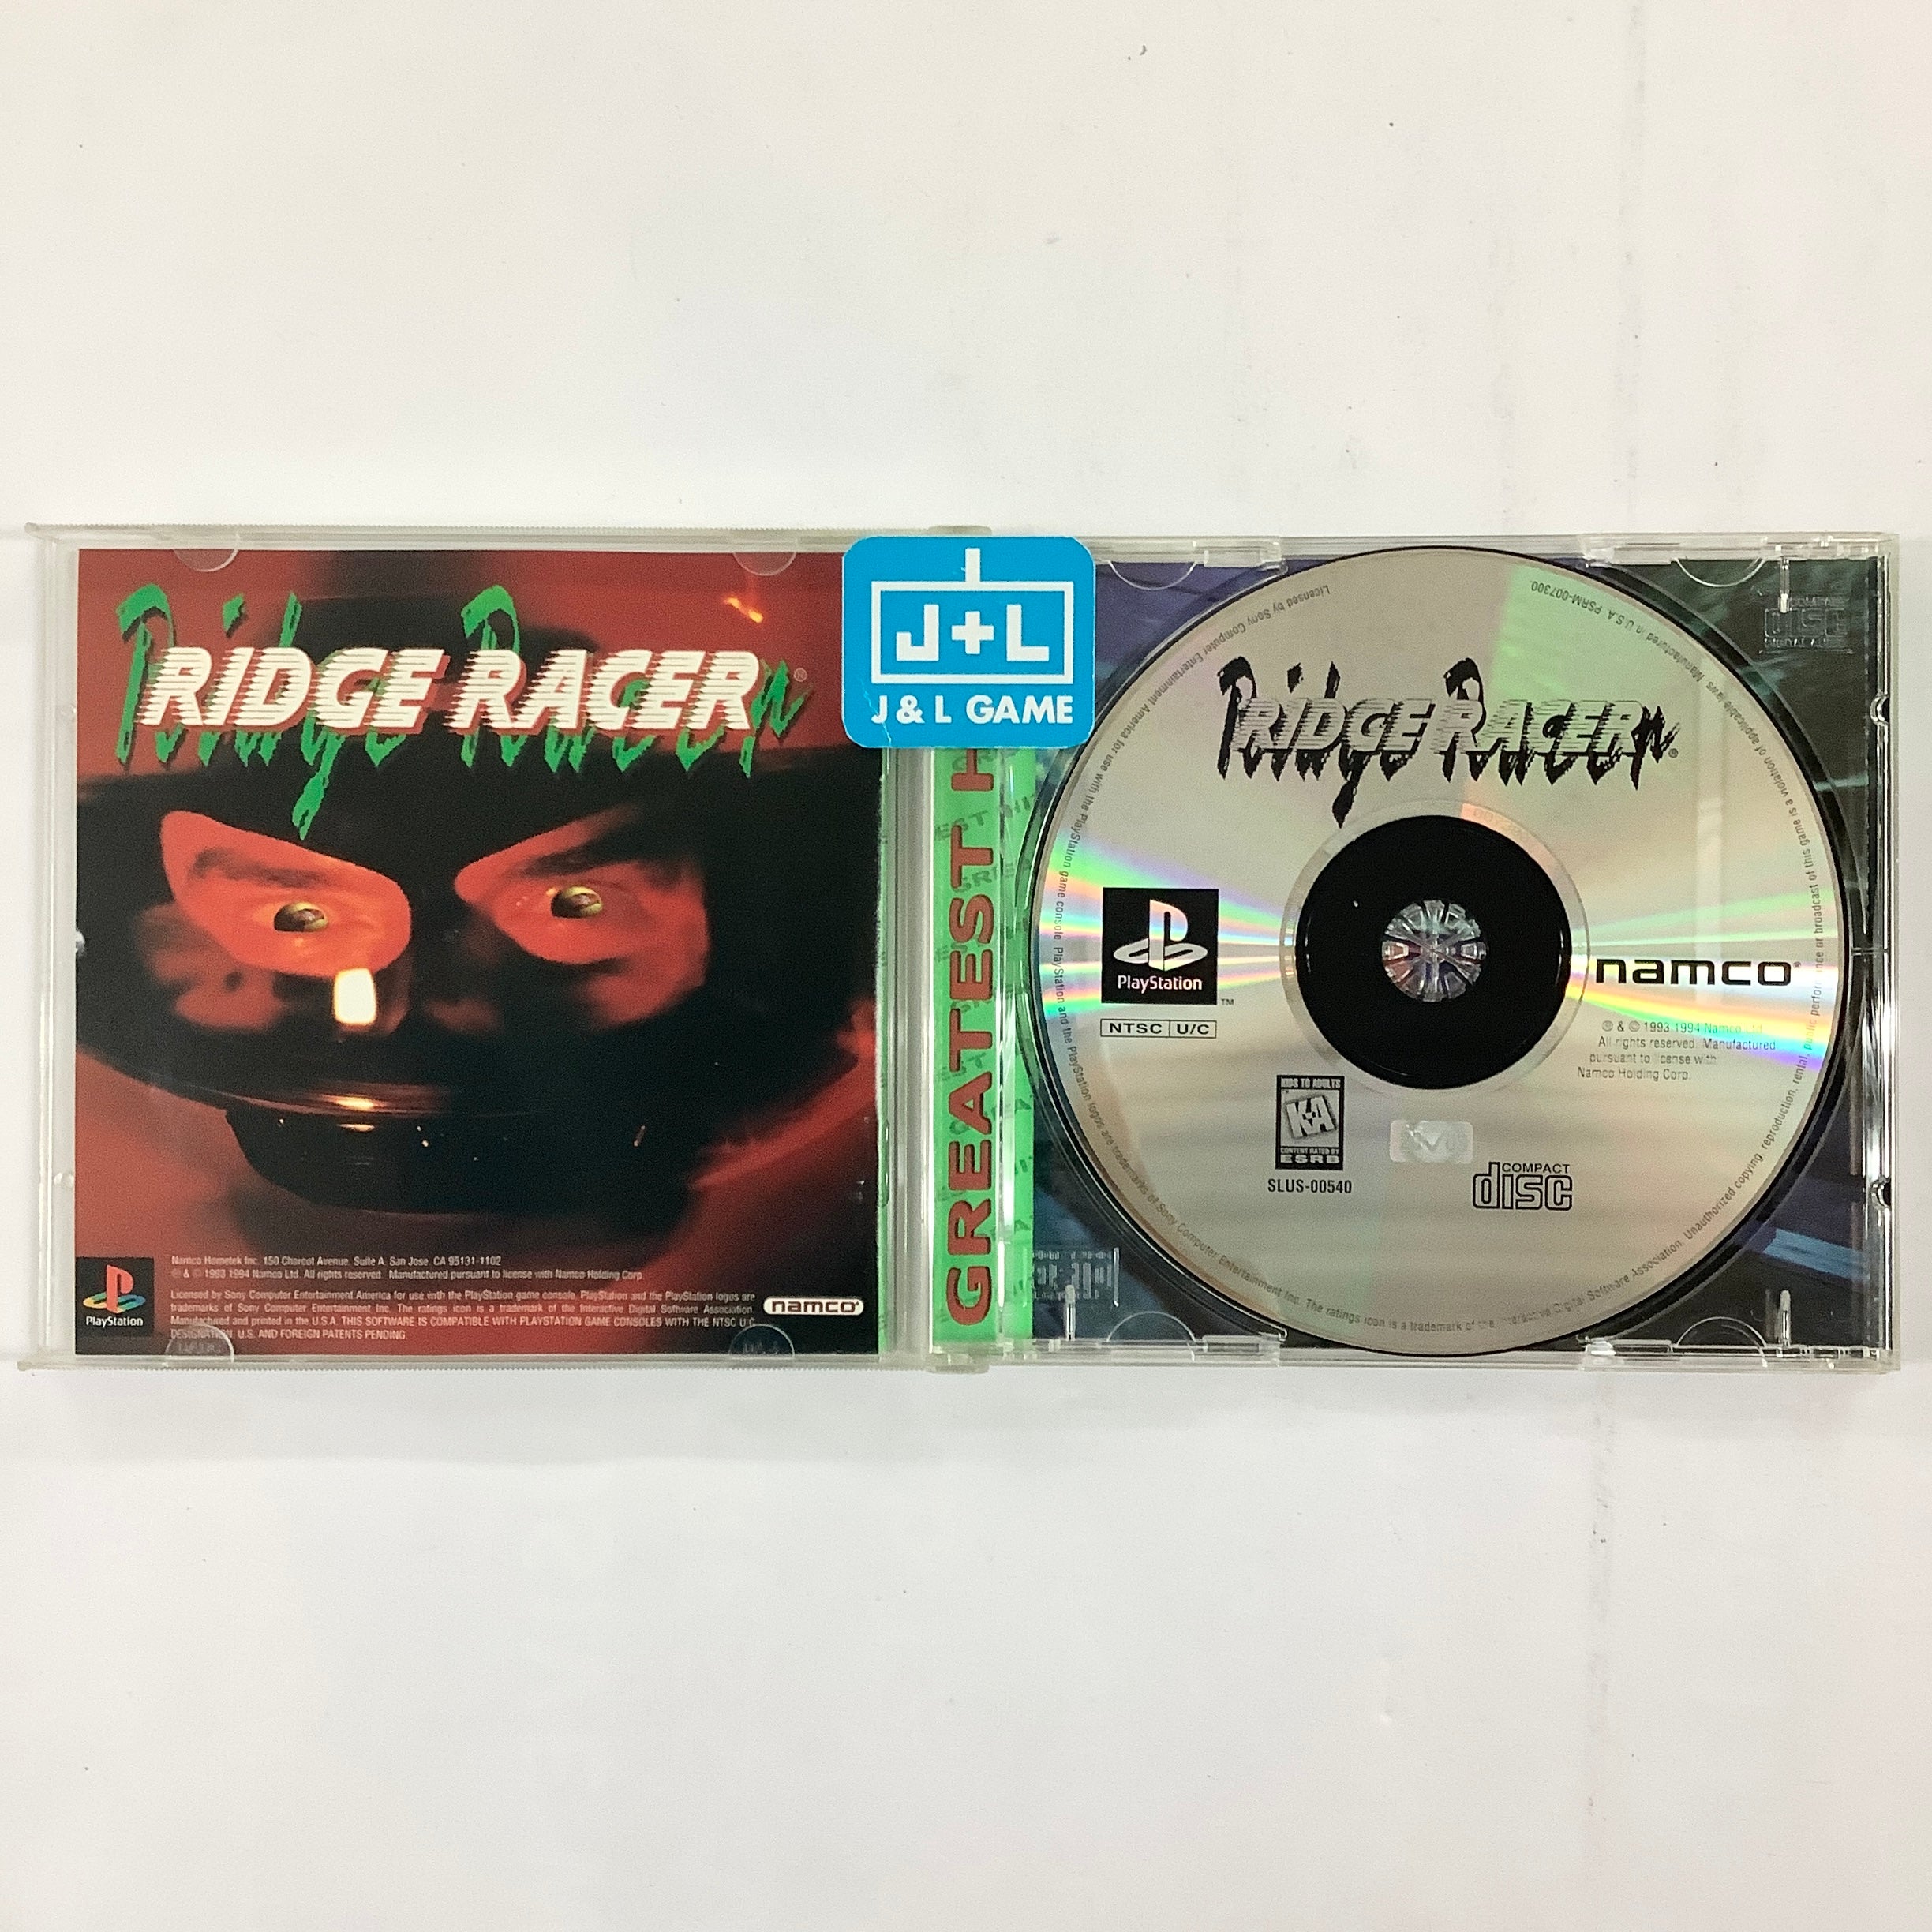 Ridge Racer (Greatest Hits) - (PS1) PlayStation 1 [Pre-Owned] Video Games Namco   